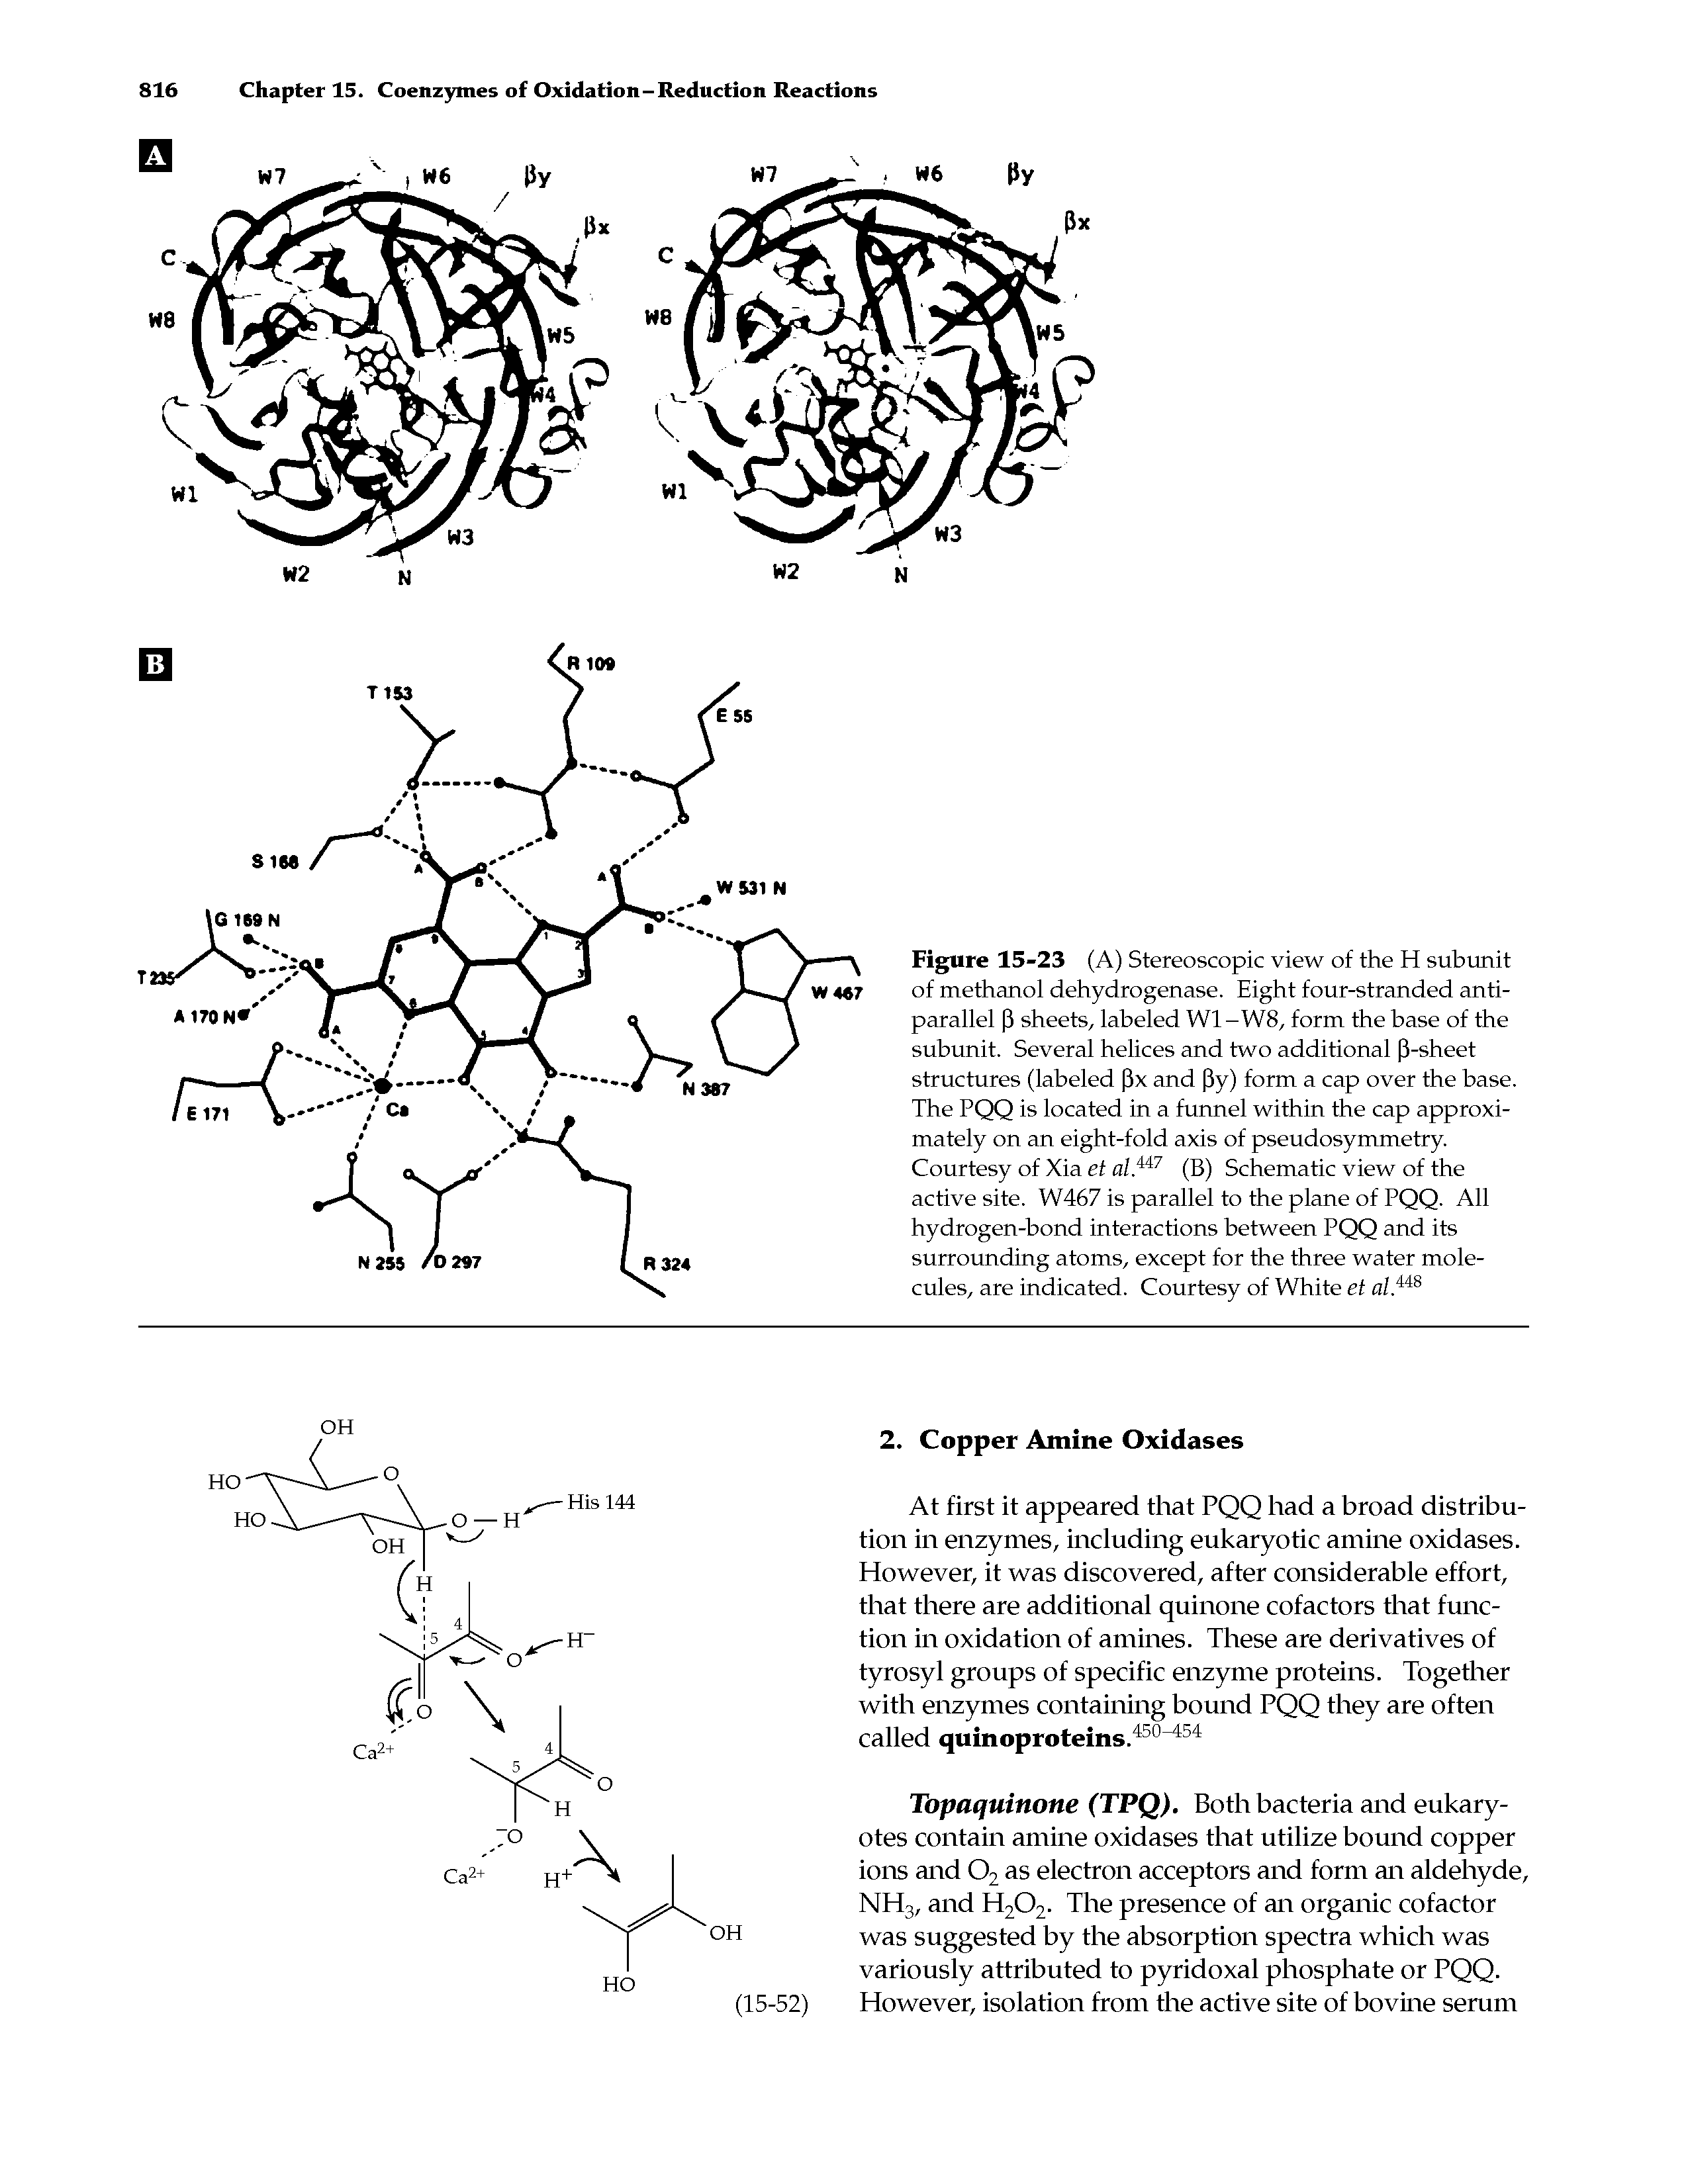 Figure 15-23 (A) Stereoscopic view of the H subunit of methanol dehydrogenase. Eight four-stranded antiparallel 3 sheets, labeled W1-W8, form the base of the subunit. Several helices and two additional P-sheet structures (labeled Px and Py) form a cap over the base. The PQQ is located in a funnel within the cap approximately on an eight-fold axis of pseudosymmetry. Courtesy of Xia et al.ii7 (B) Schematic view of the active site. W467 is parallel to the plane of PQQ. All hydrogen-bond interactions between PQQ and its surrounding atoms, except for the three water molecules, are indicated. Courtesy of White et al.ii8...